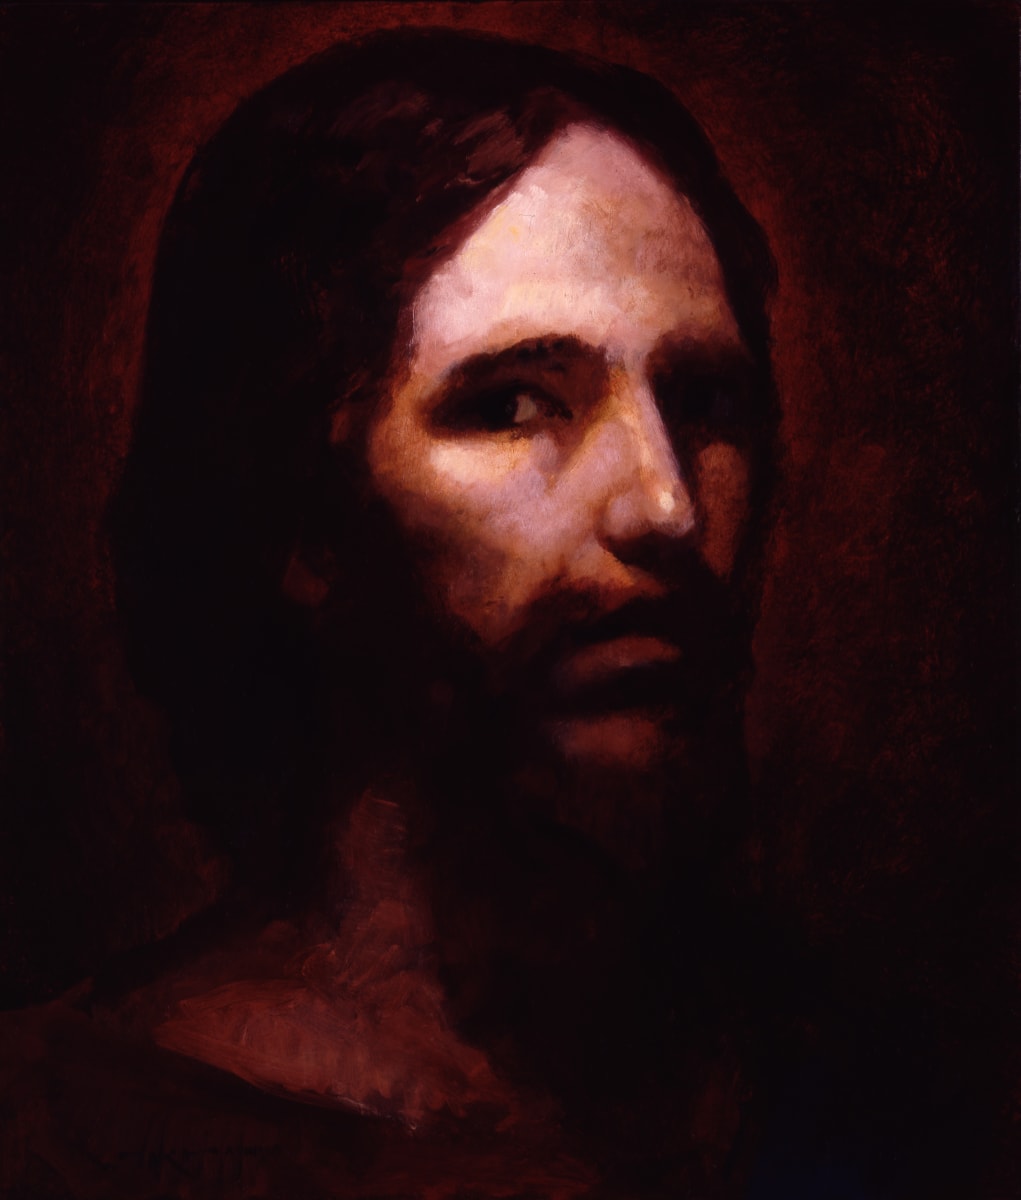 Christ Portrait IX by J. Kirk Richards  Image: From a series of Christ portraits from 2009. 